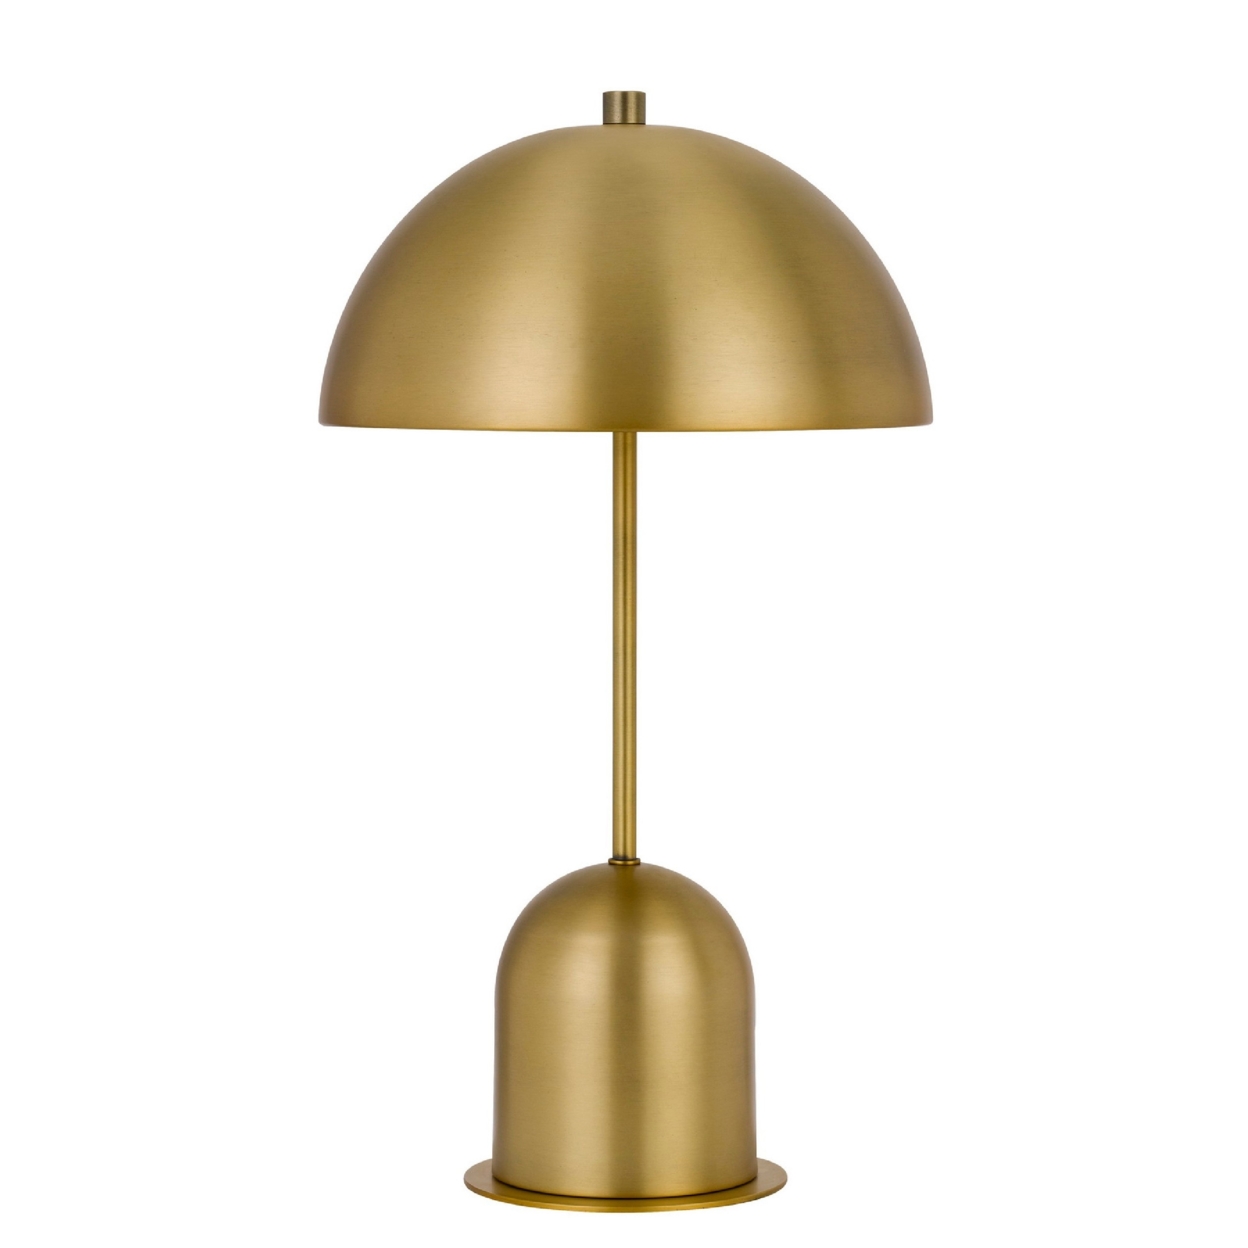 20 Inch Metal Accent Table Lamp With Dome Shade, Brass-Saltoro Sherpi